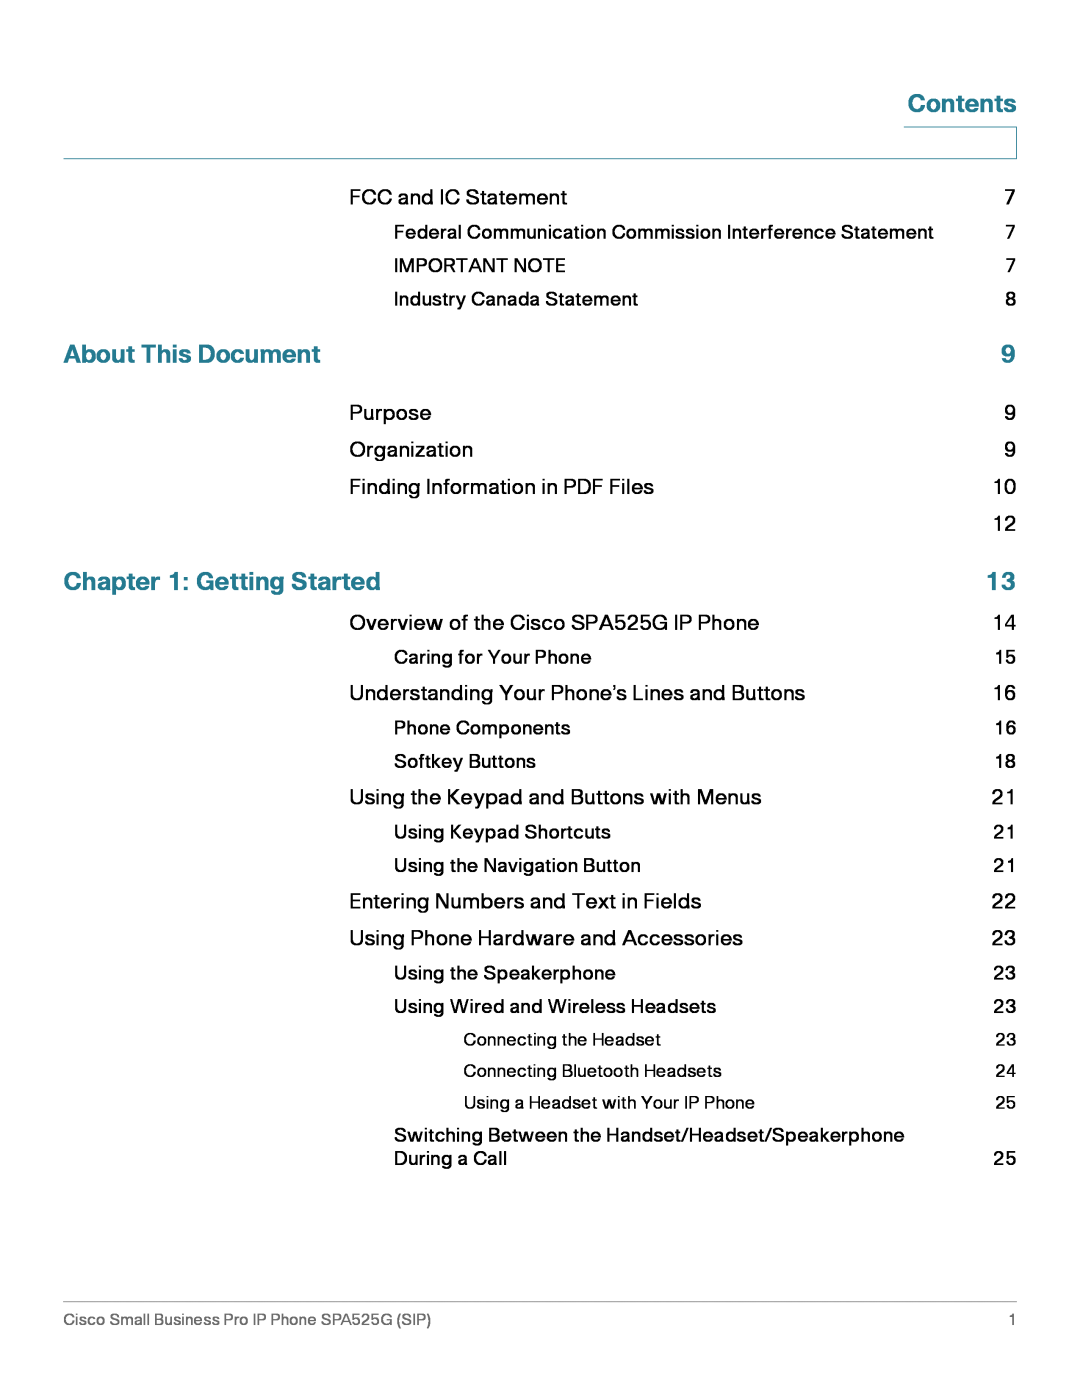 Cisco Systems SPA525G manual Contents, About This Document, Getting Started 